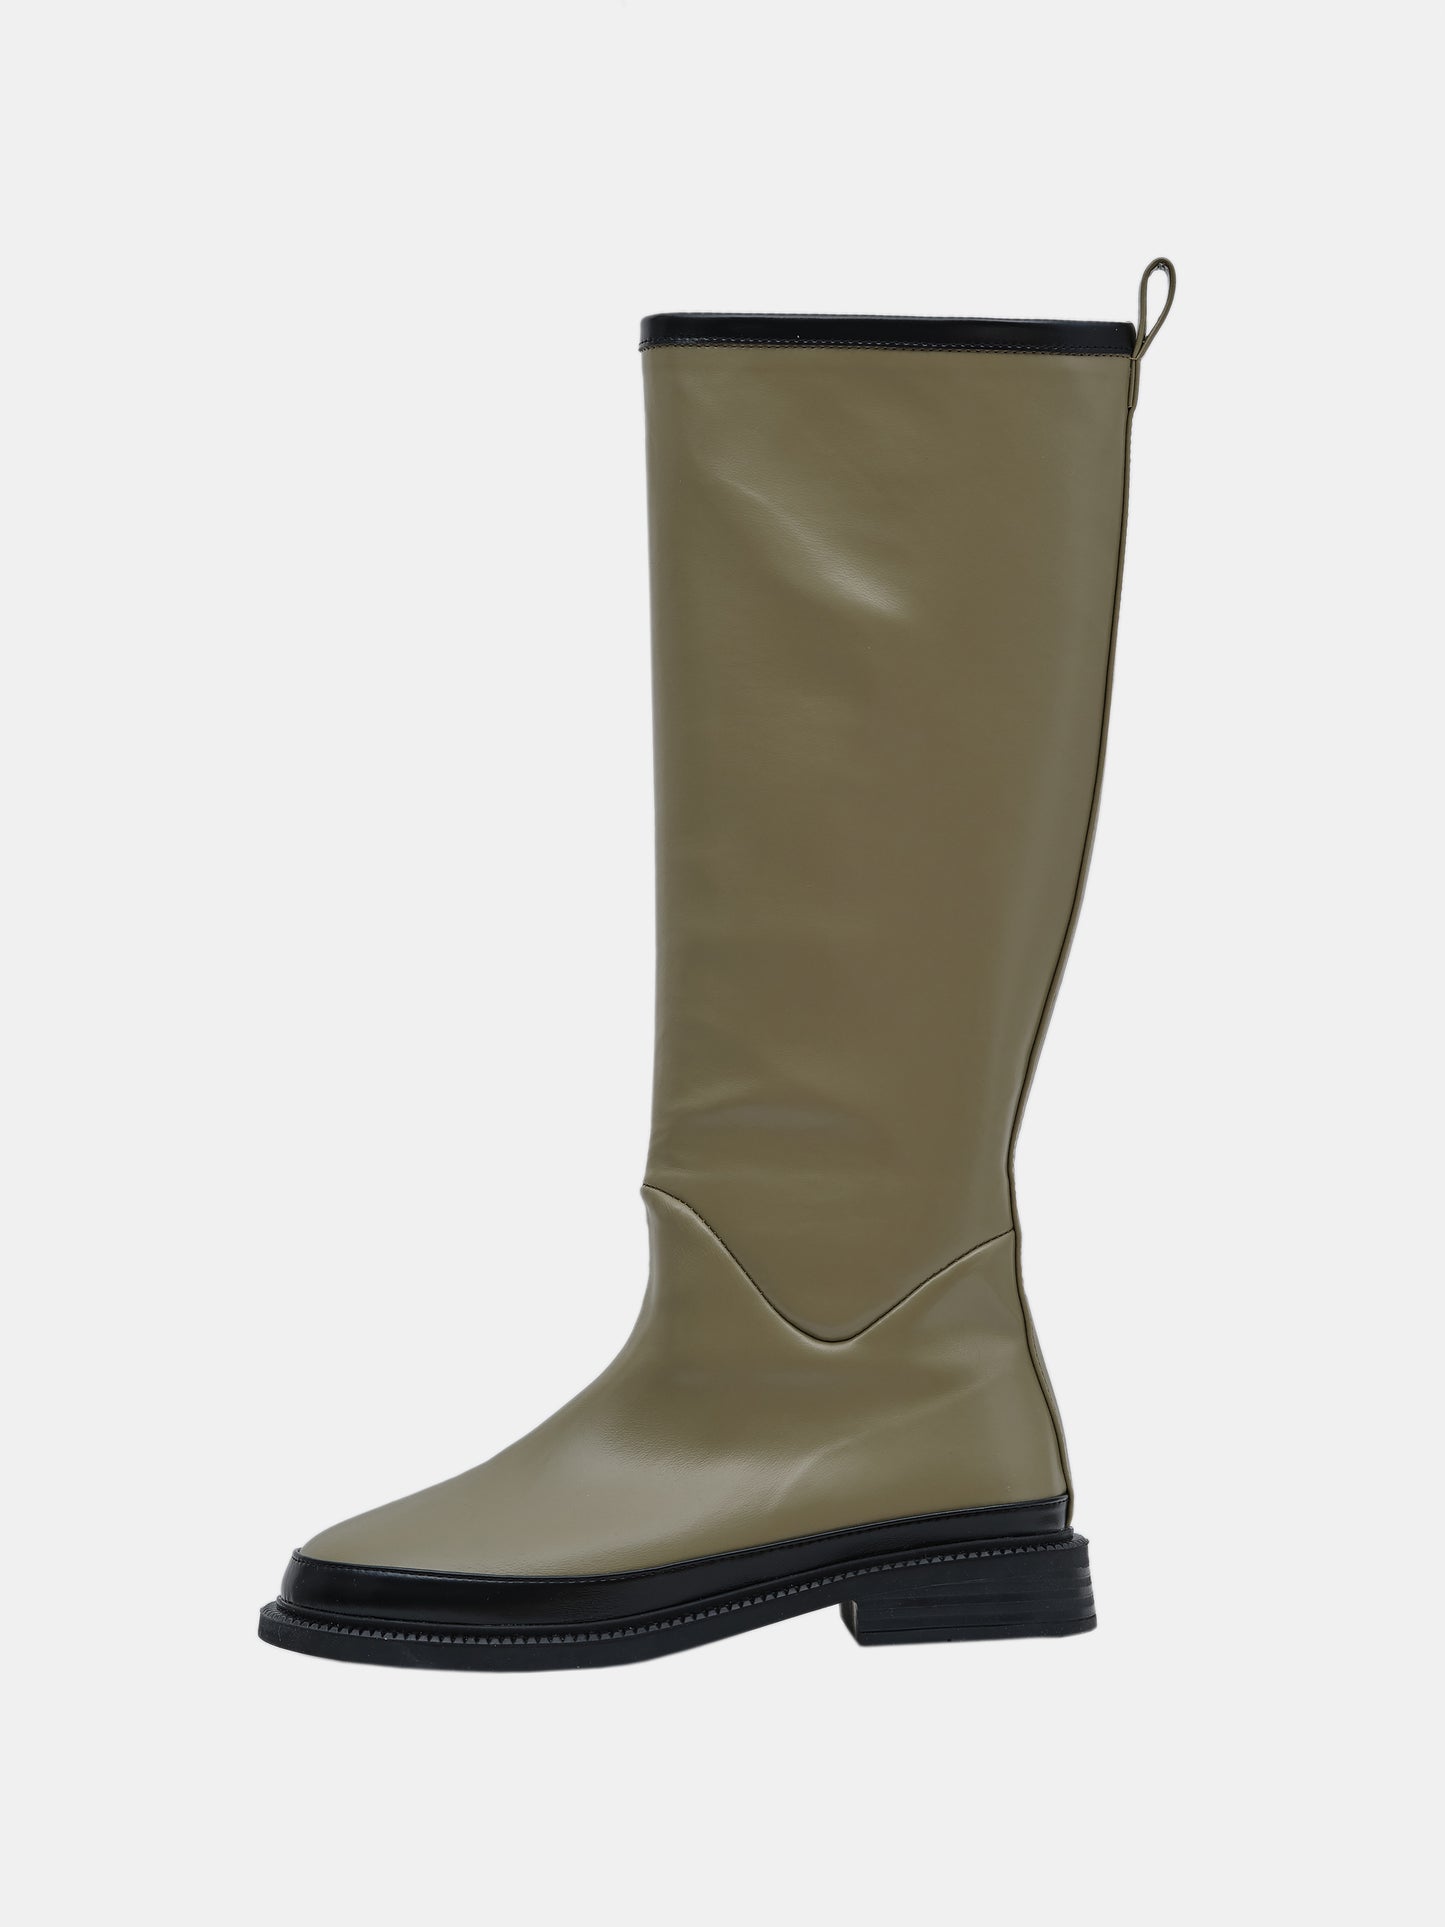 Contrast Wellington Boots, Olive